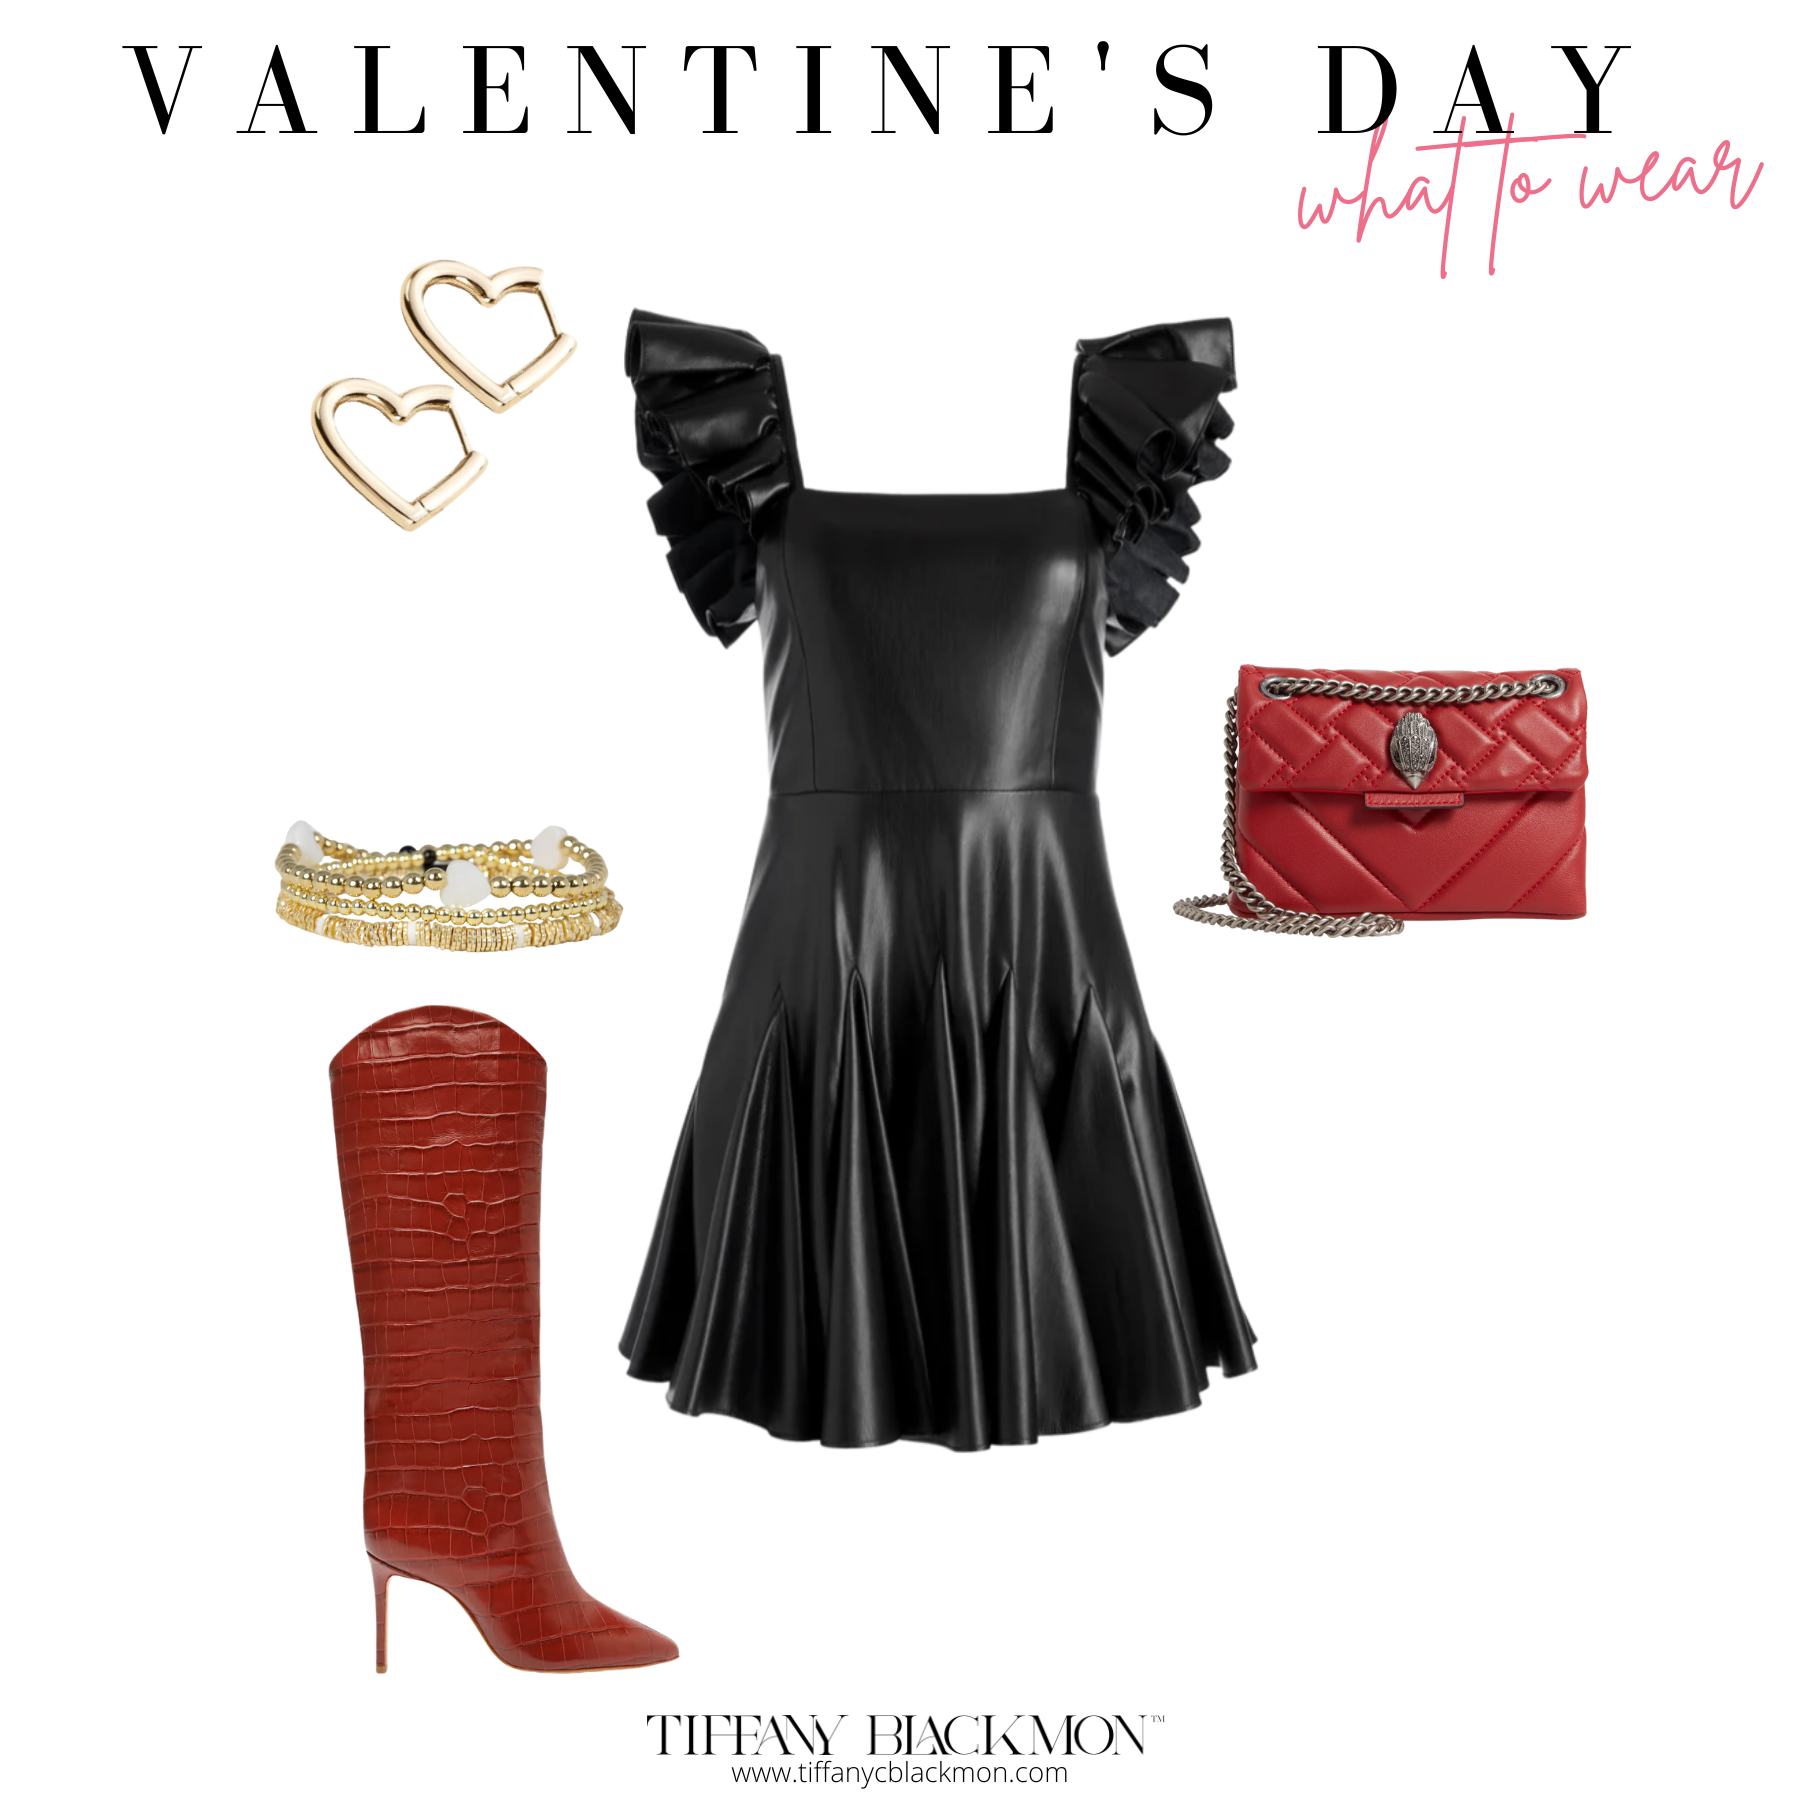 Valentine's Day: What to Wear
#leatherdress #blackdress #datenight #heartearrings #purse #red #boots #jewelry #outfitinspiration 